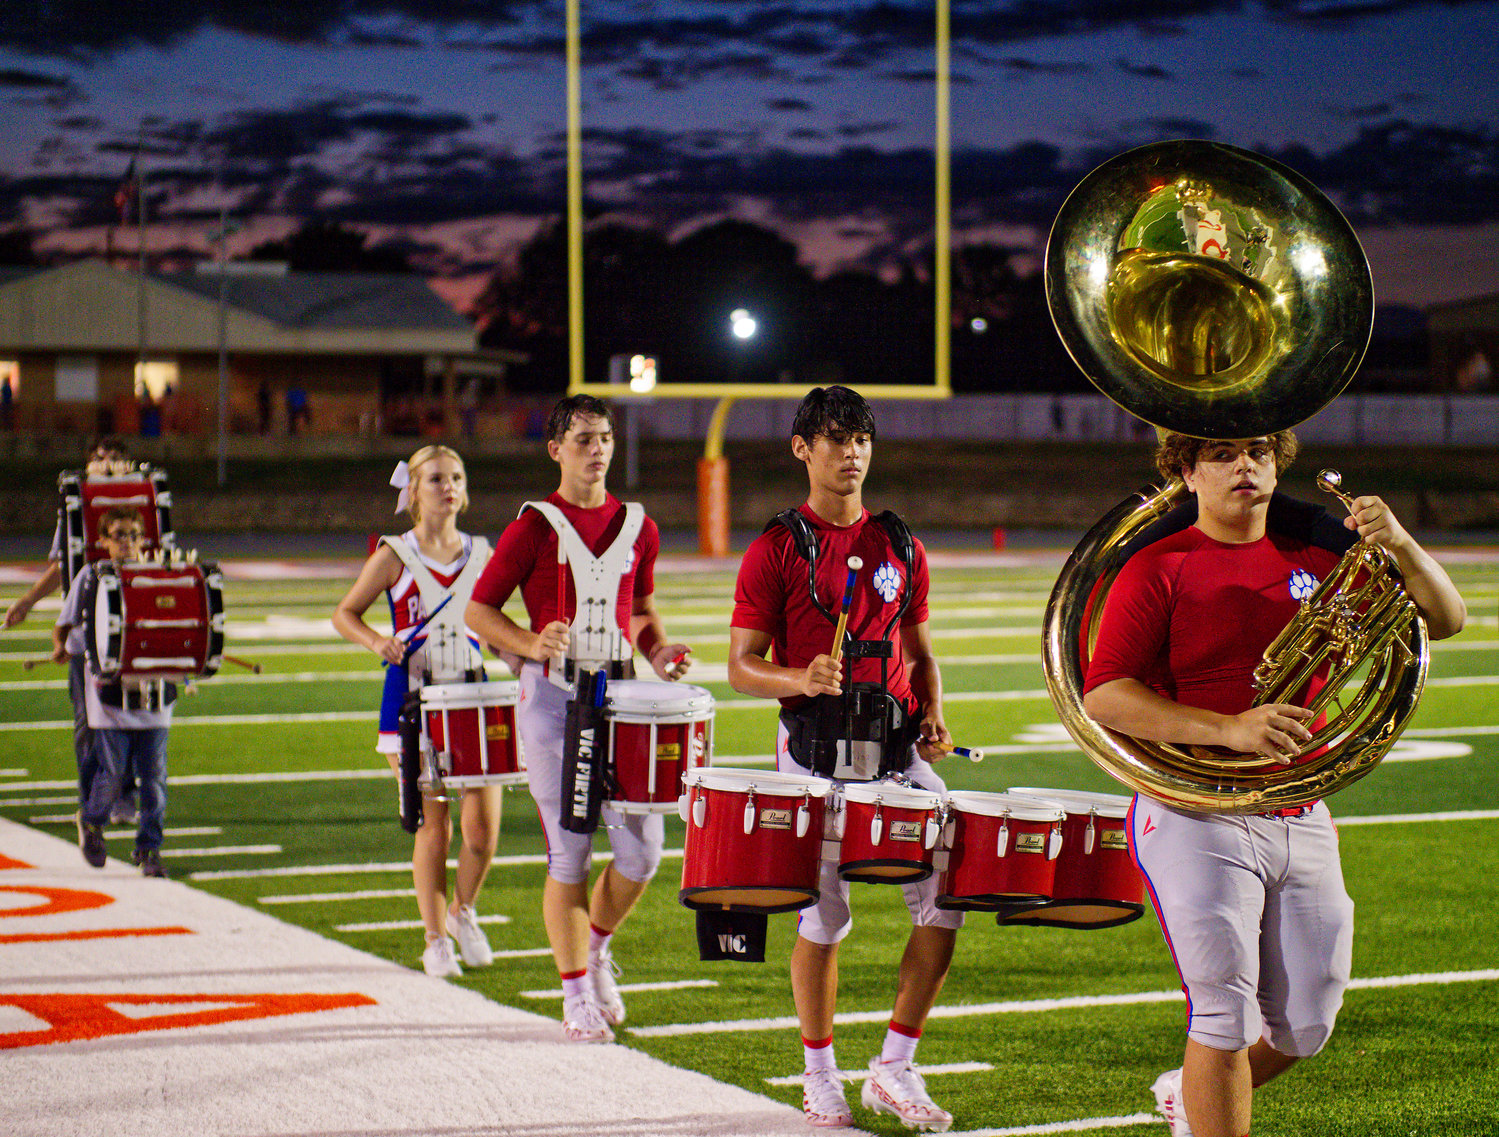 Alba-Golden football players and a cheerleader fill out the percussion section during halftime. [find more football photos]